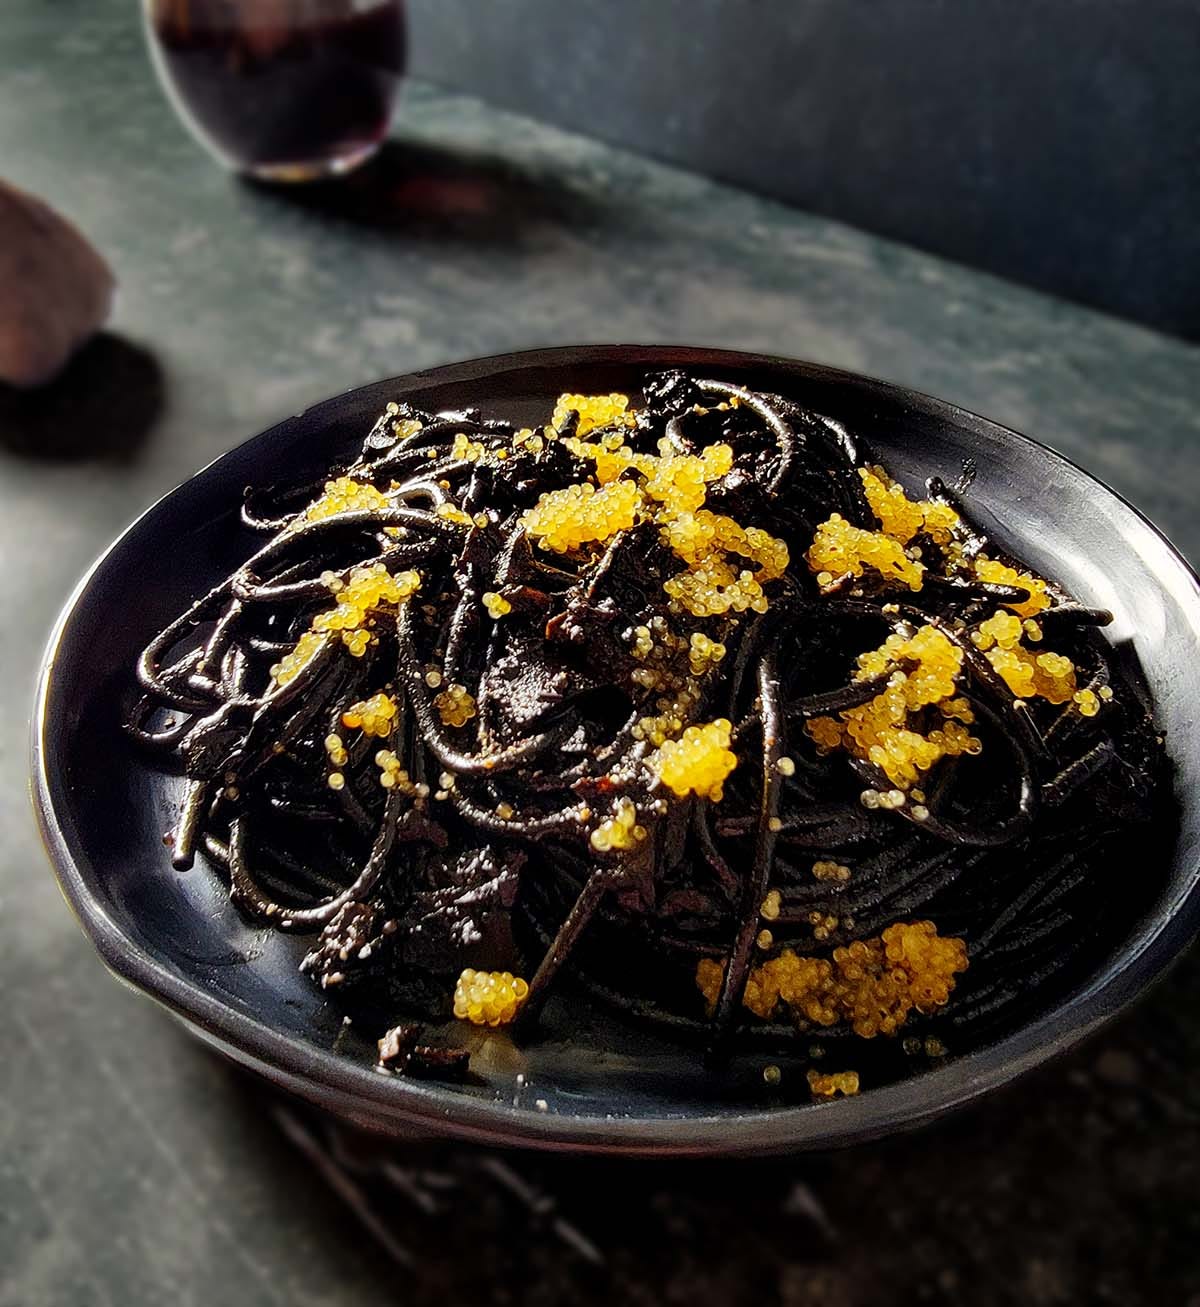 A plate of black pasta with caviar on a dark background.